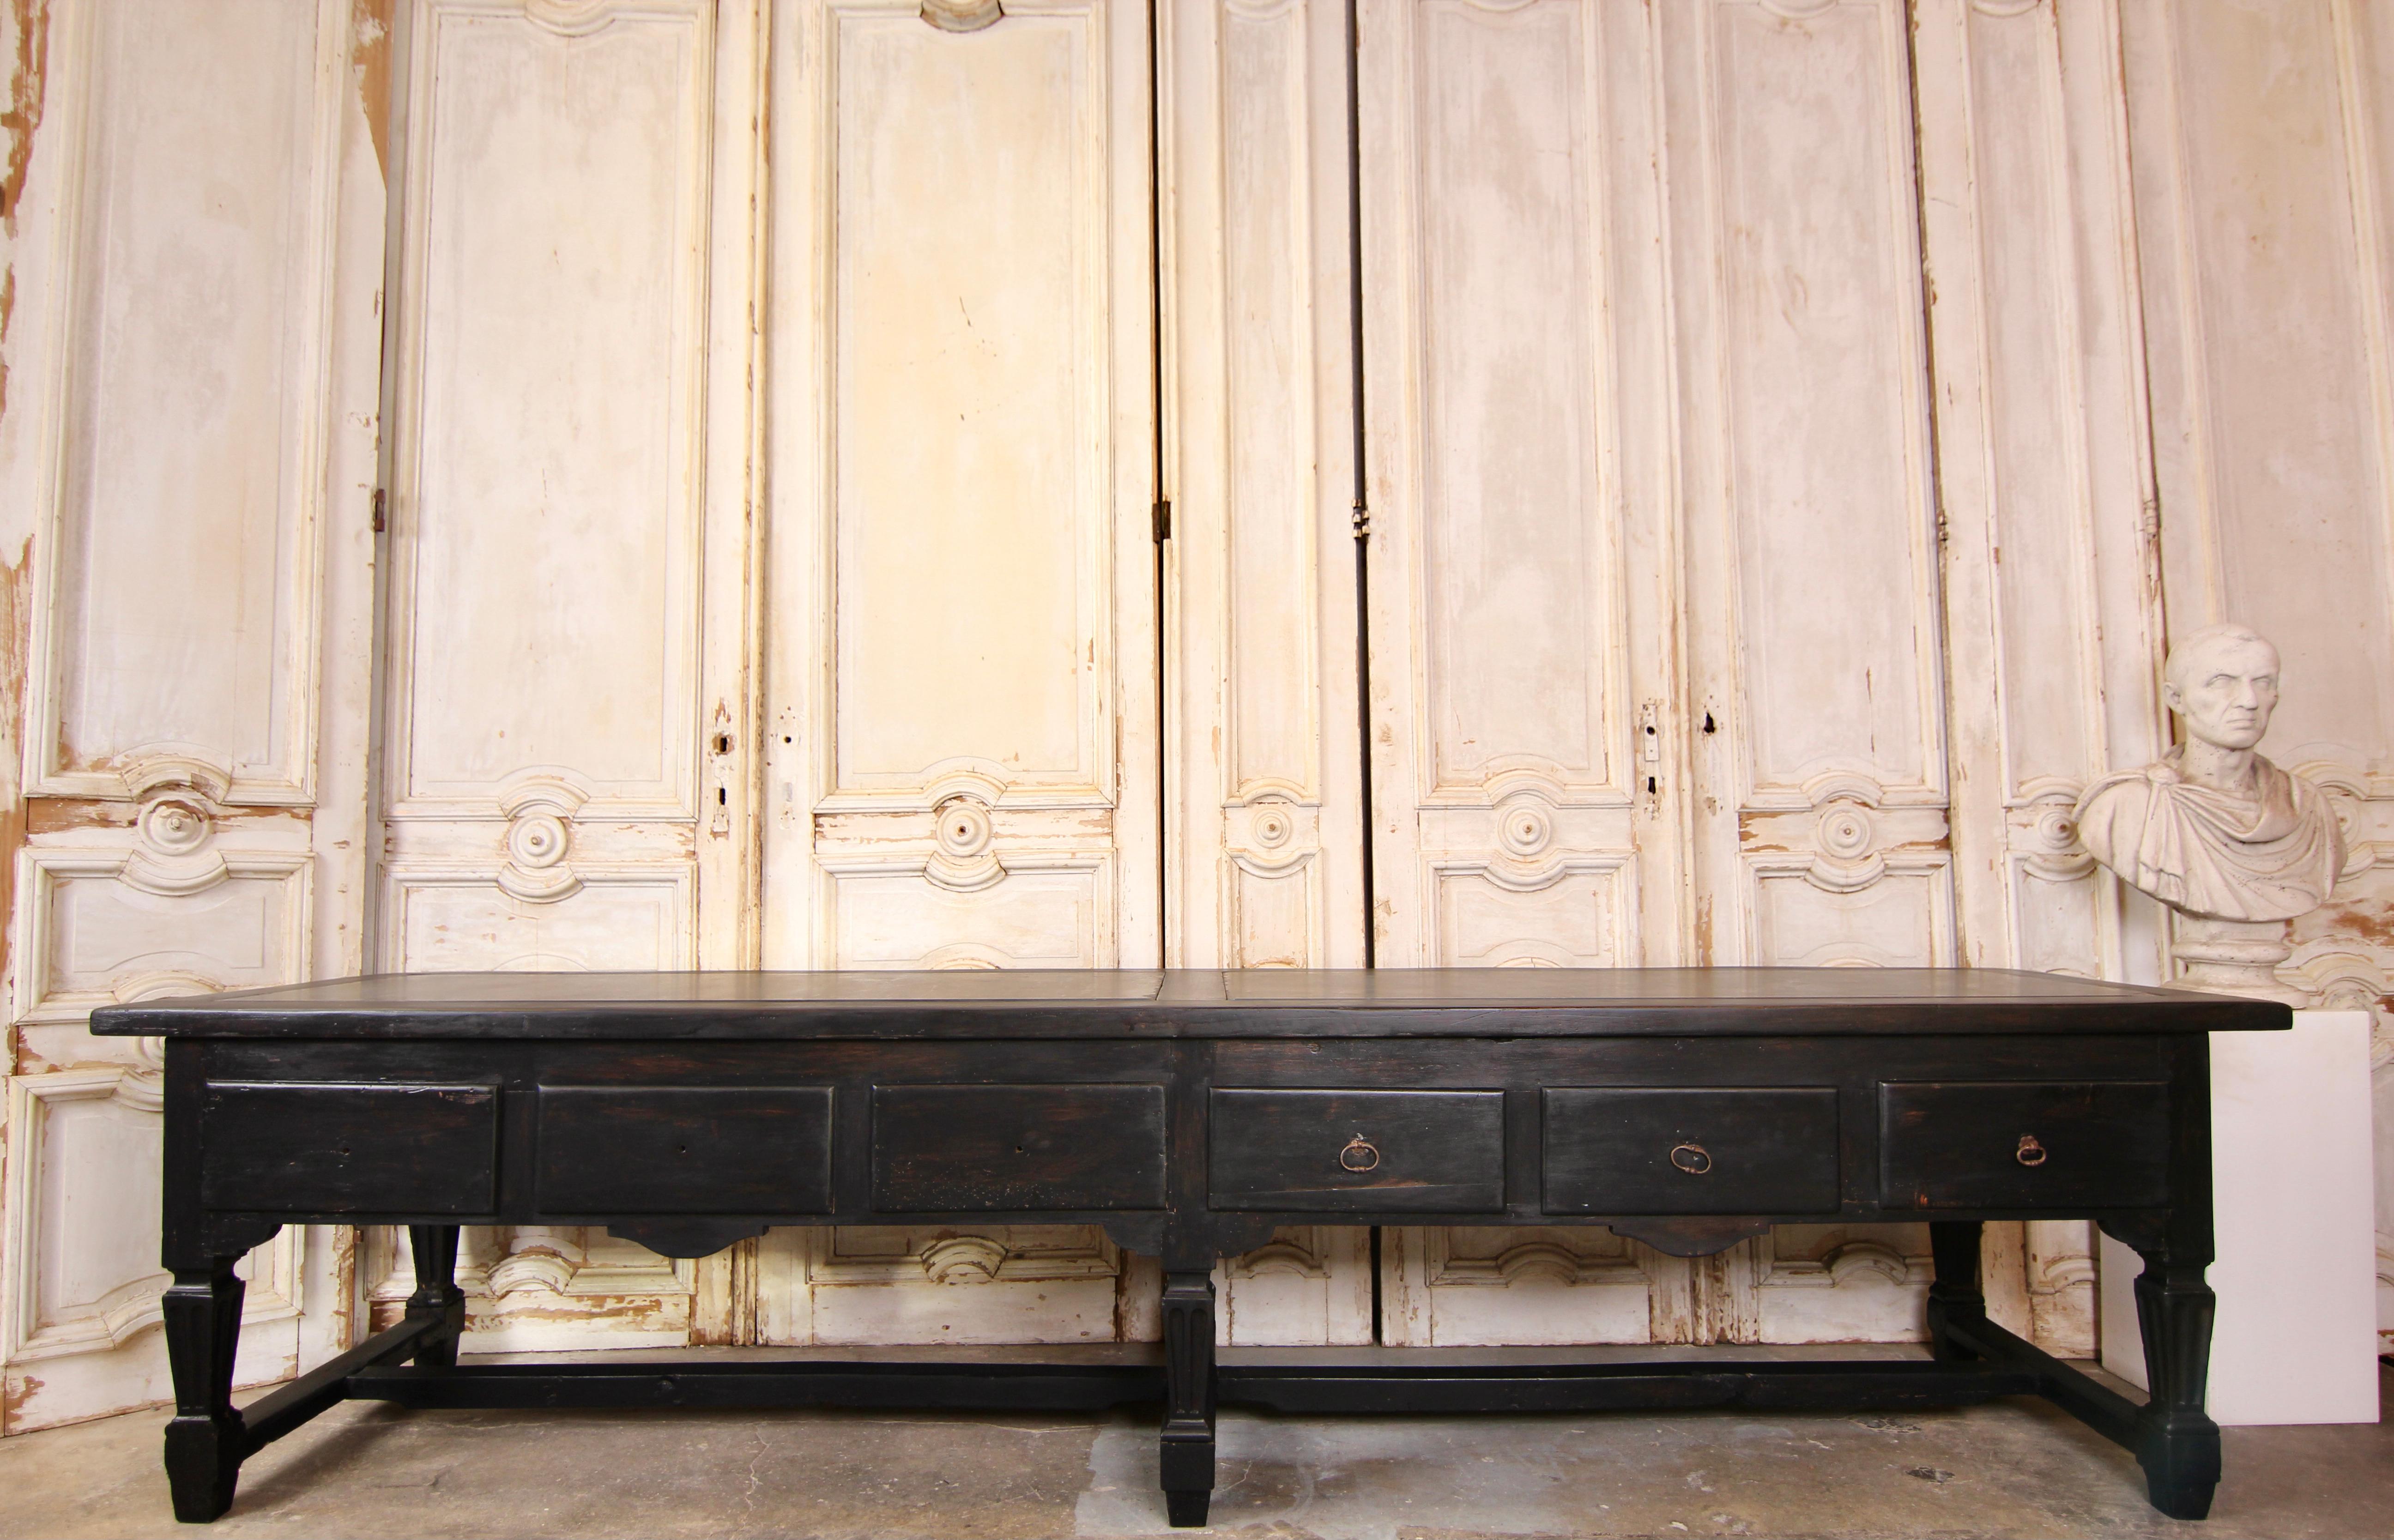 Large Louis XVI kitchen prep table. France, c. 1760. Oak wood with 2 inlaid slabs of bluestone.

This unique freestanding work table was made for a country estate or chateau in the 18th century. It formed the centre of a large kitchen and is